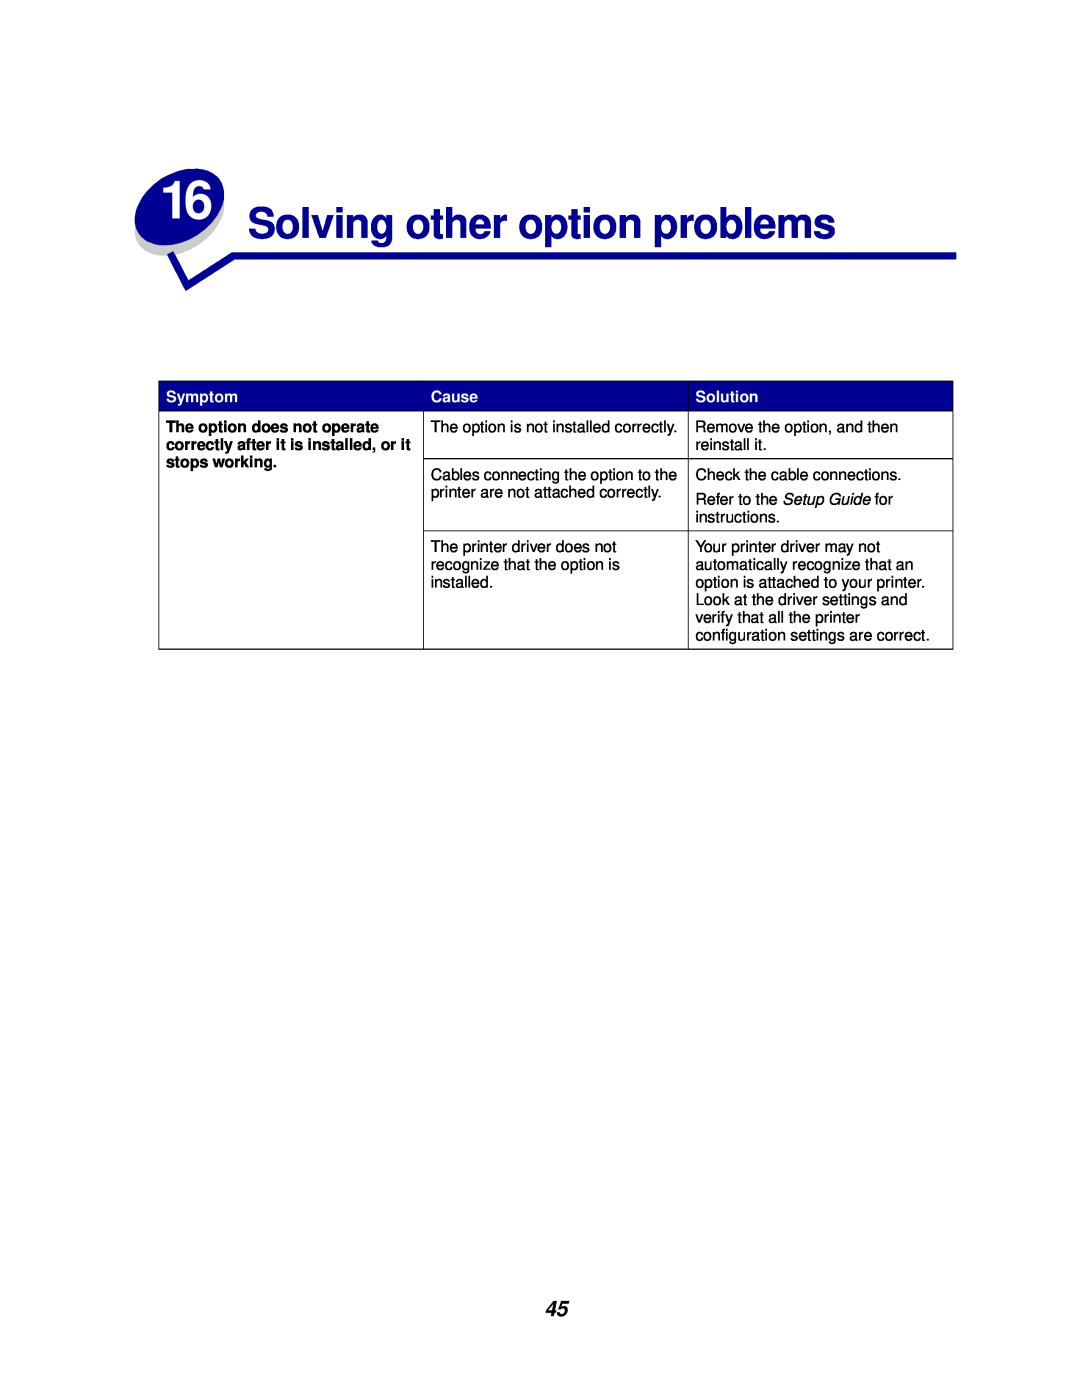 Lexmark 812 manual Solving other option problems, Symptom, Cause, Solution, The option does not operate, stops working 